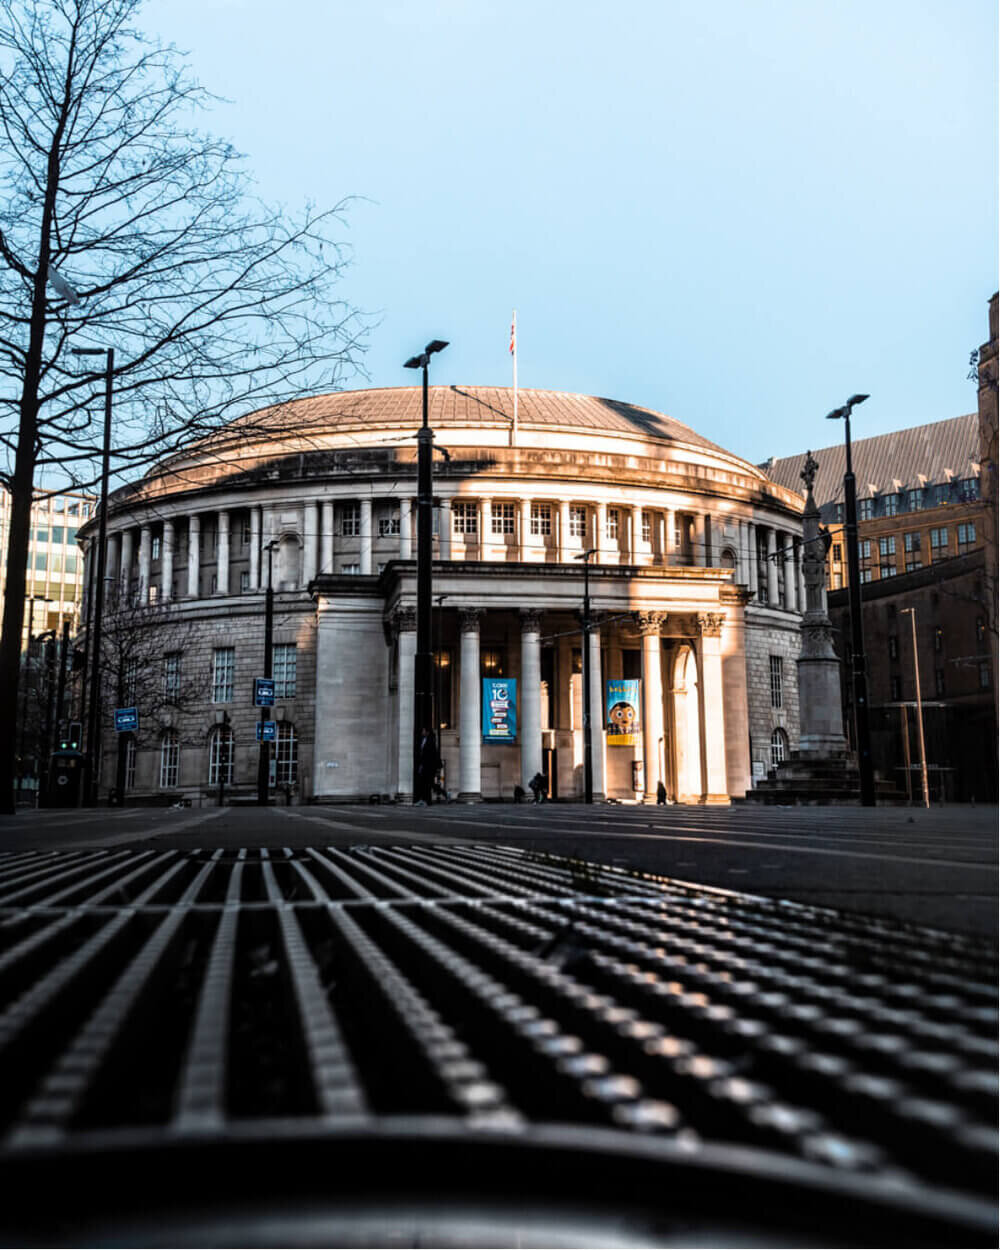 Architecture photography by Chris Curry showing the Manchester Central Library with the sun shining on it in the early hours of the morning